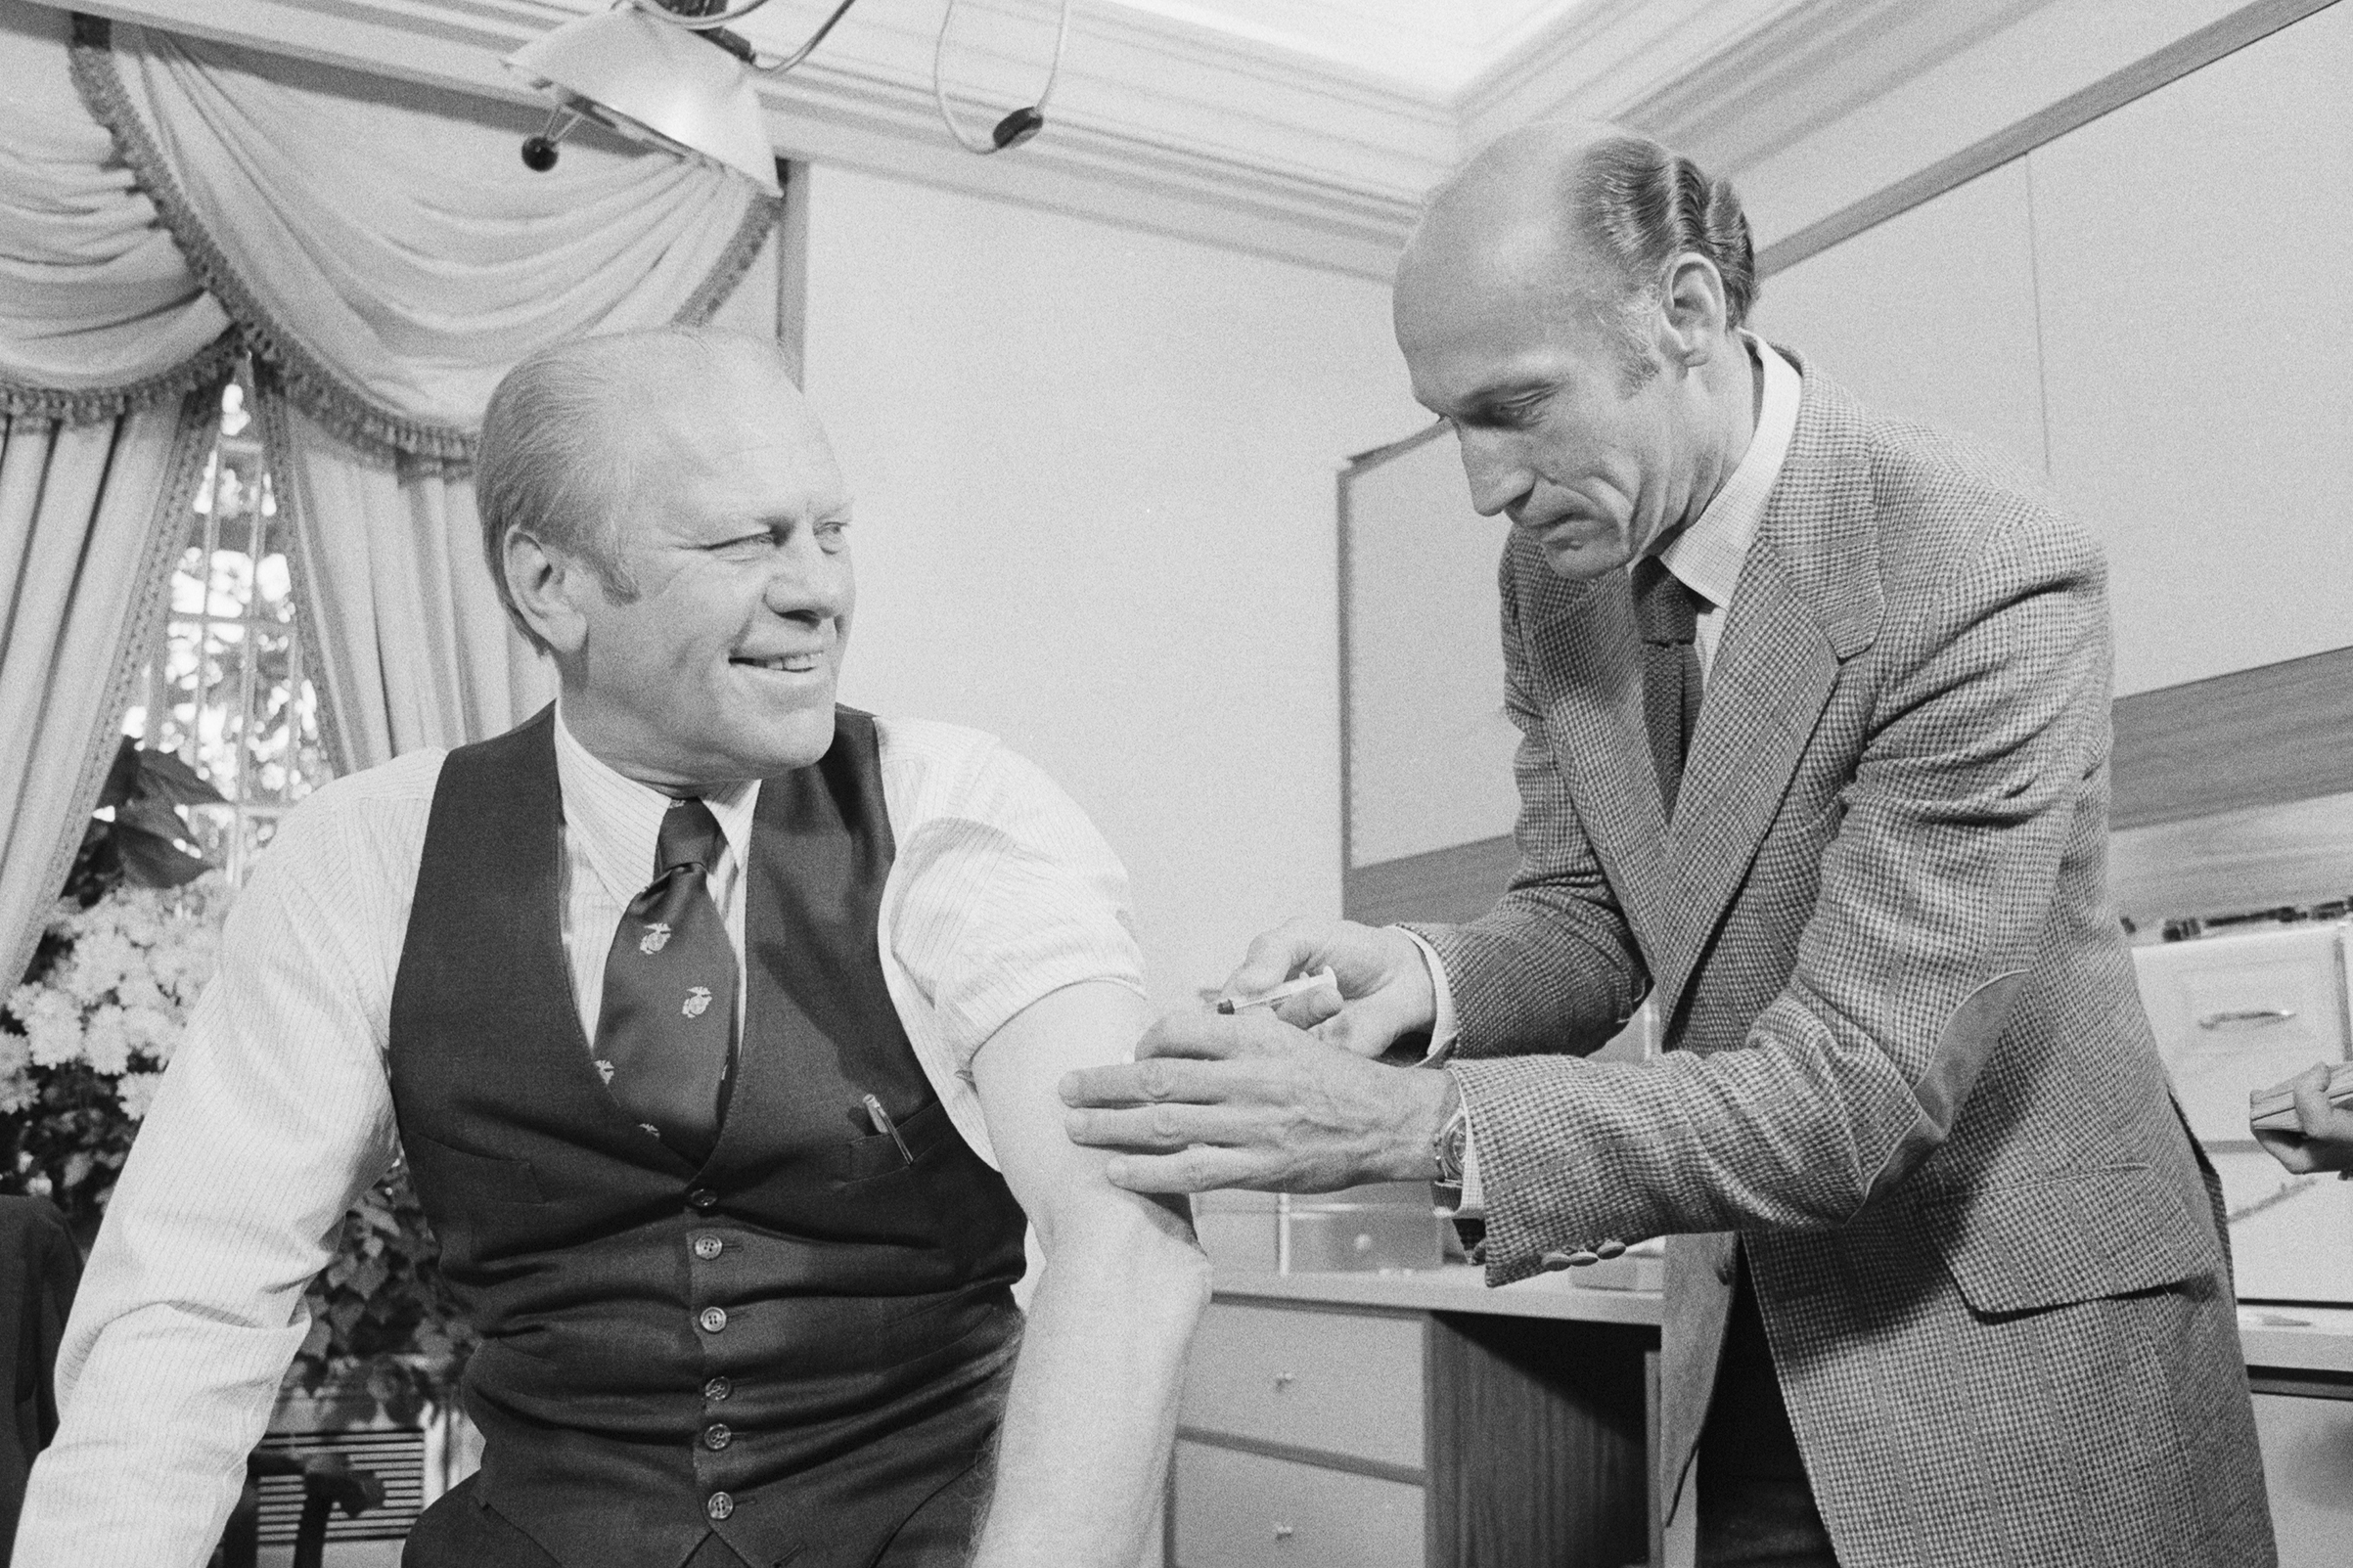 President Ford gets swine flu shot from Wm. Lukash on Oct. 14, 1976. (Bettmann Archive/Getty Images)